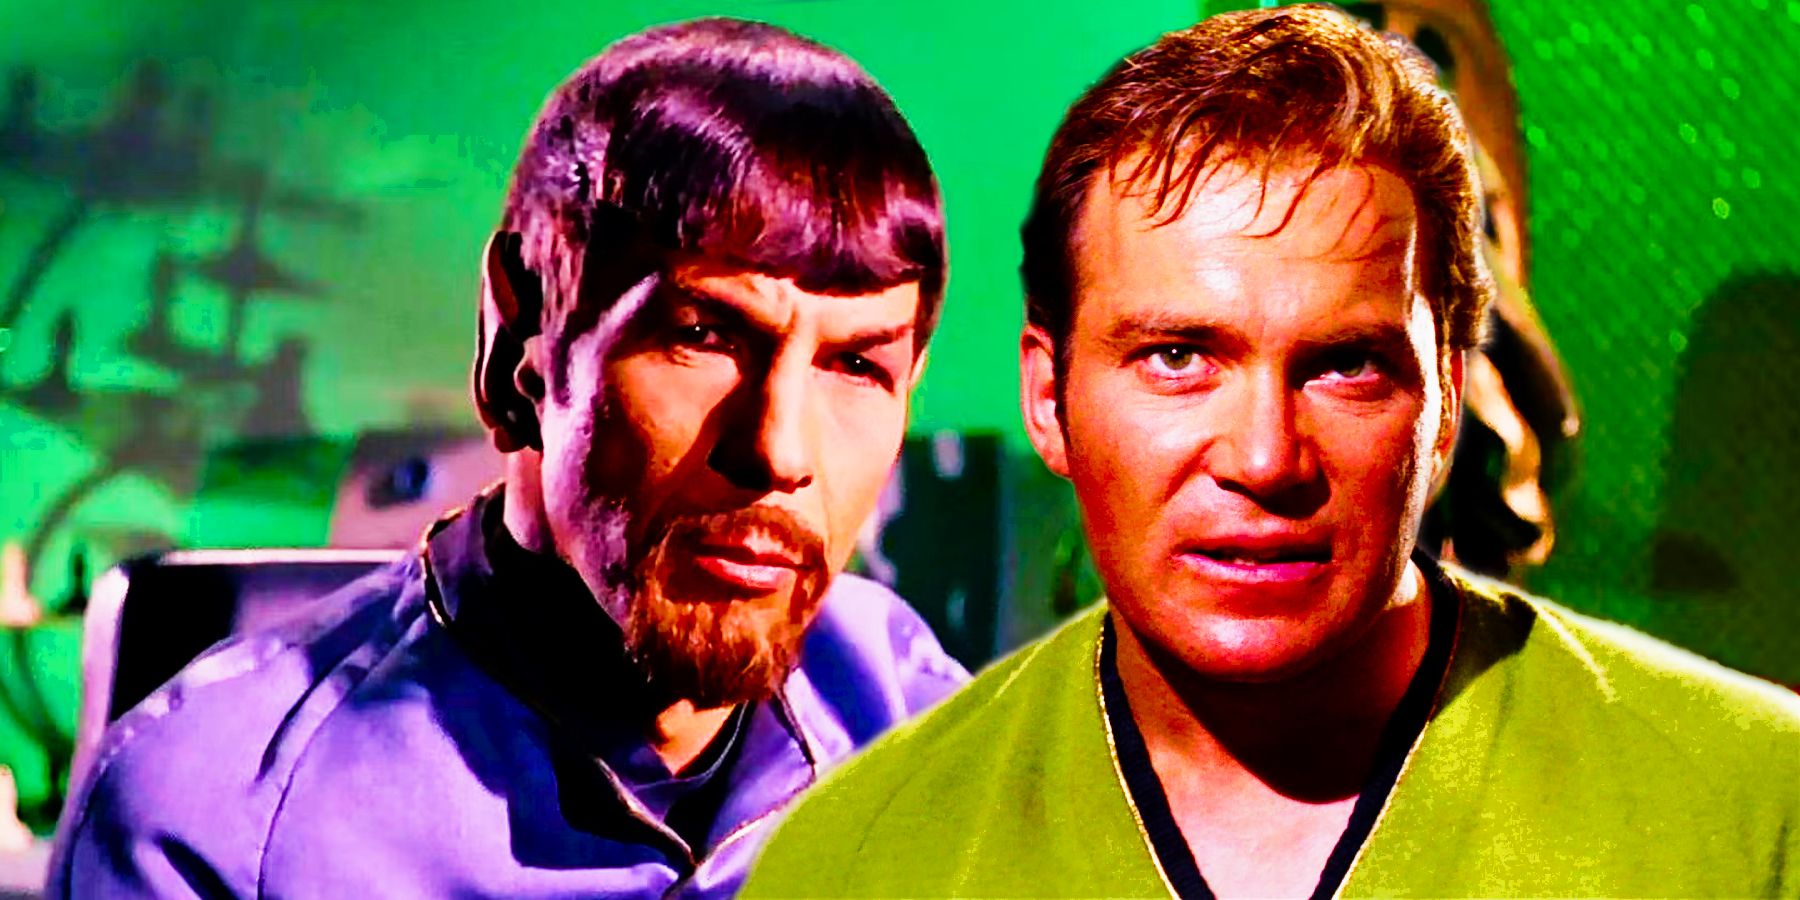 A quizzical Mirror Spock and angry Mirror Kirk from Star Trek